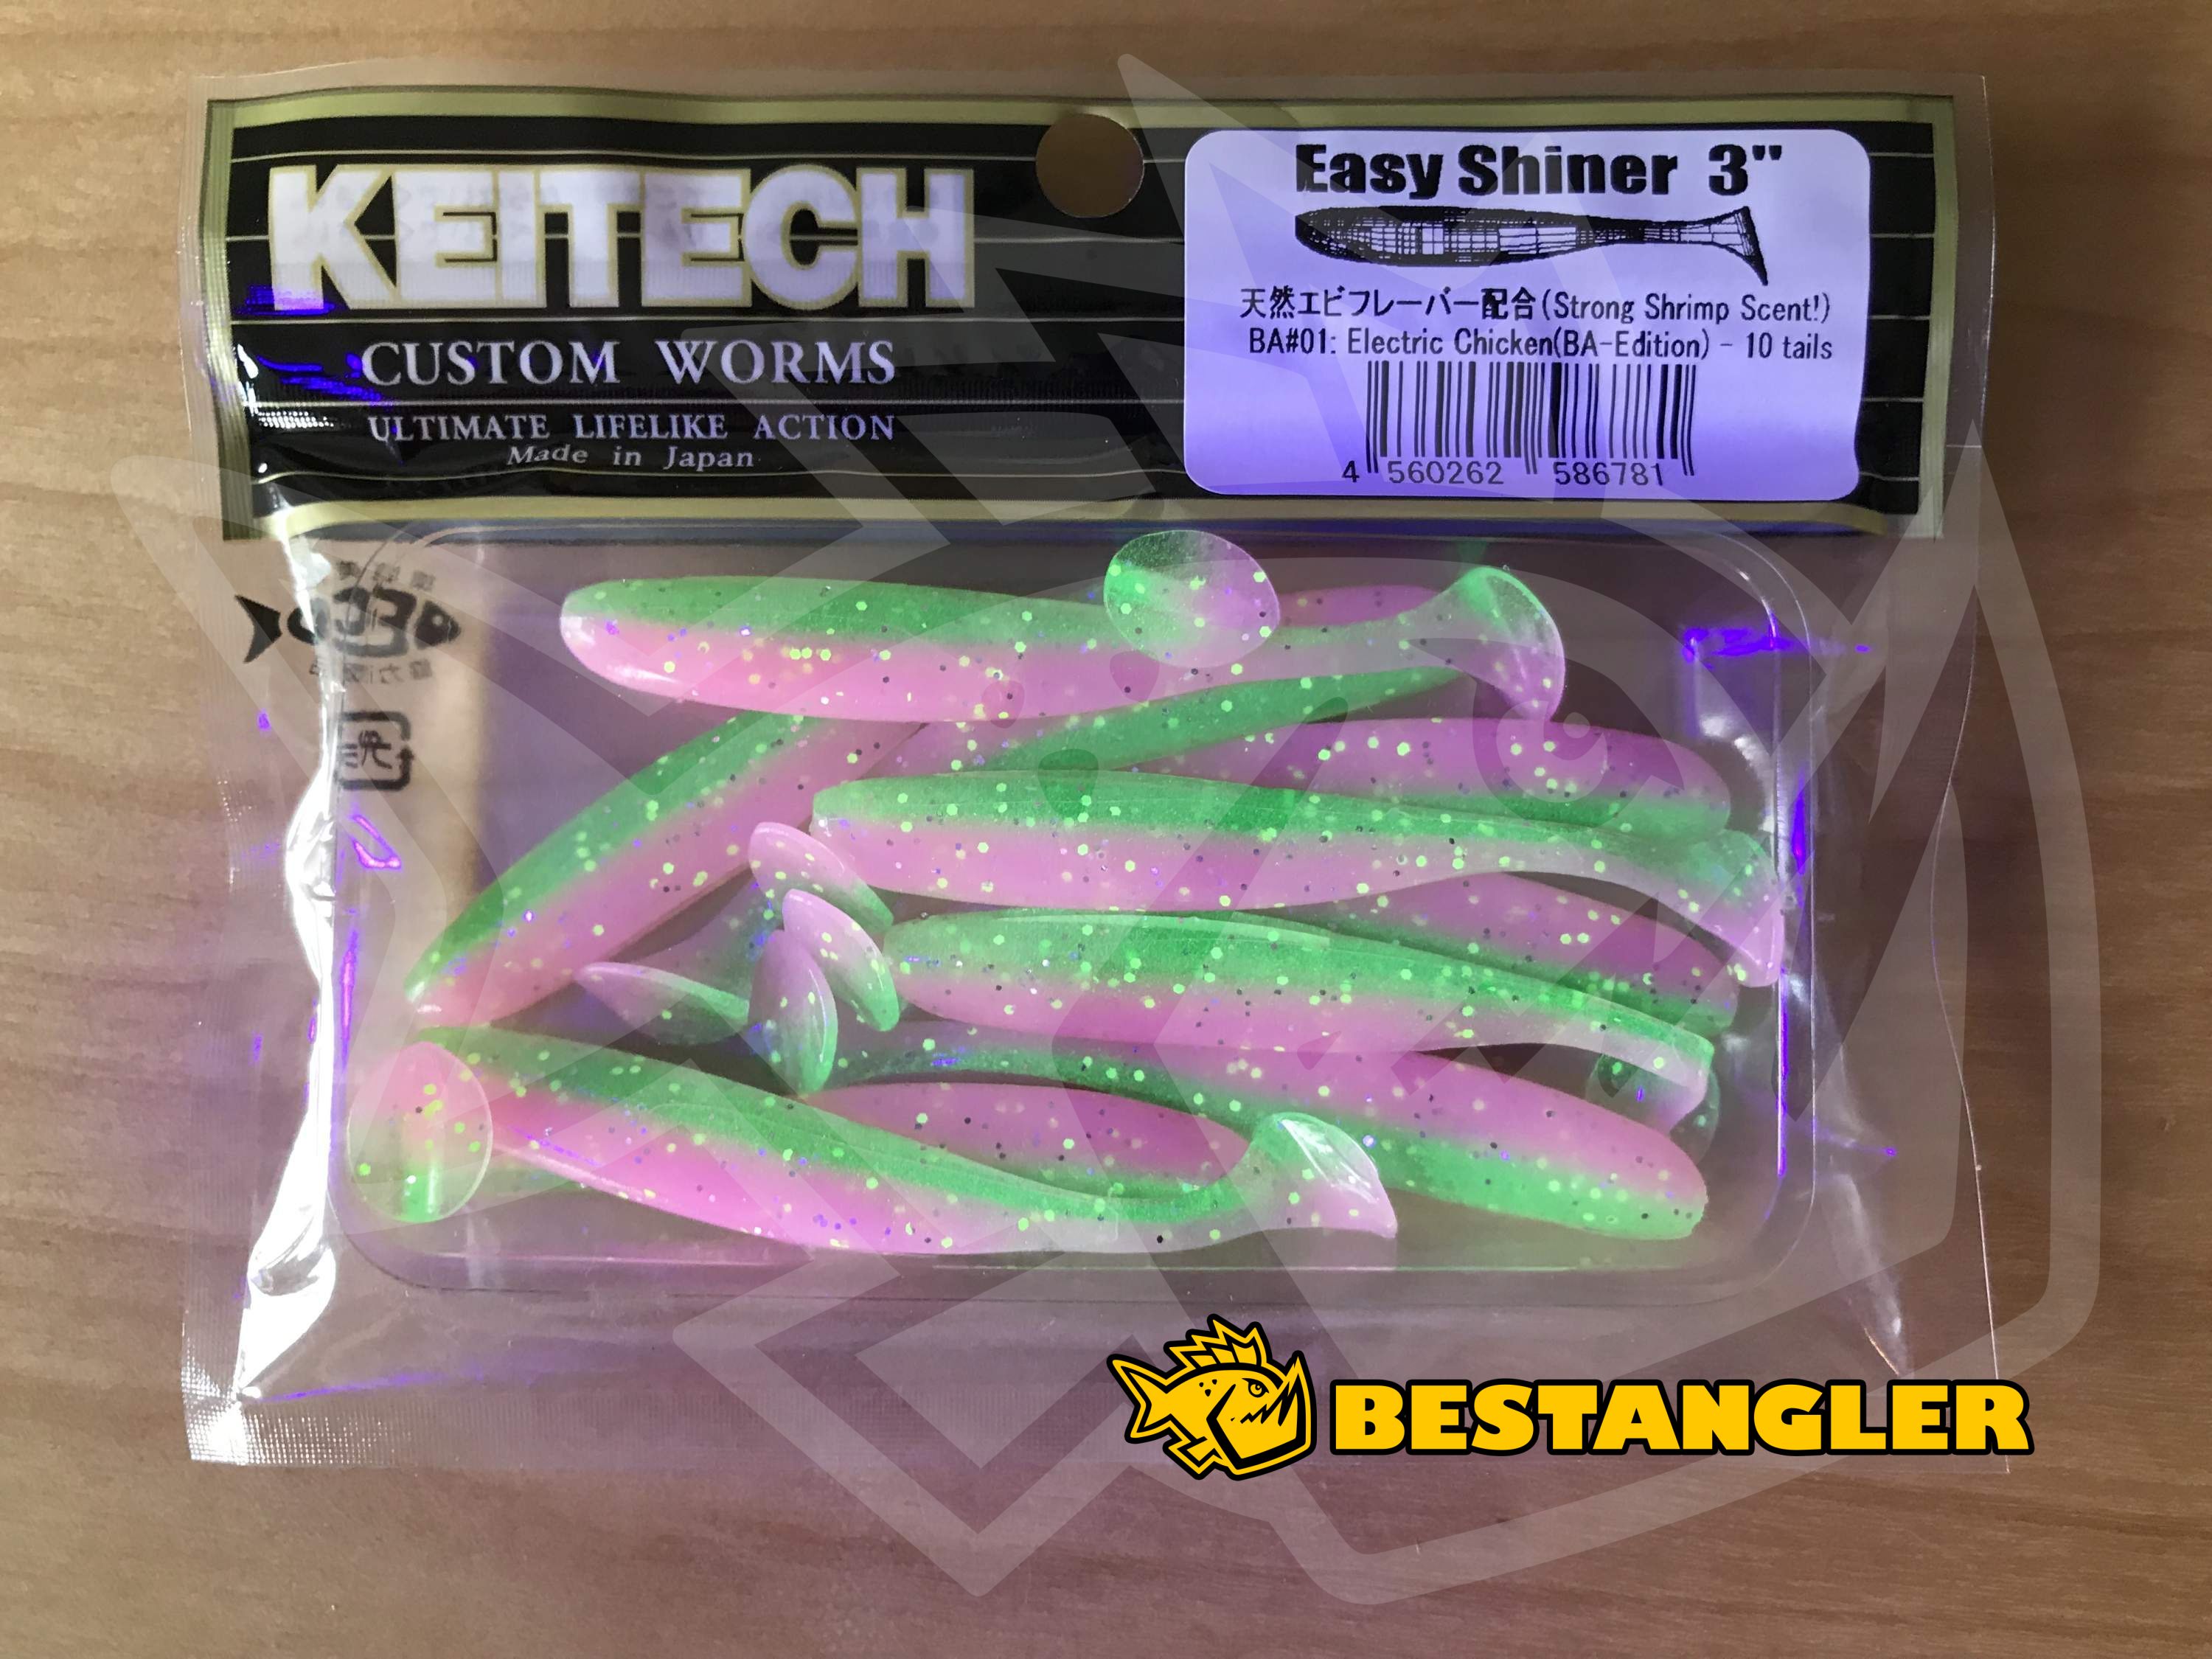 Keitech Easy Shiner 3 Electric Chicken 